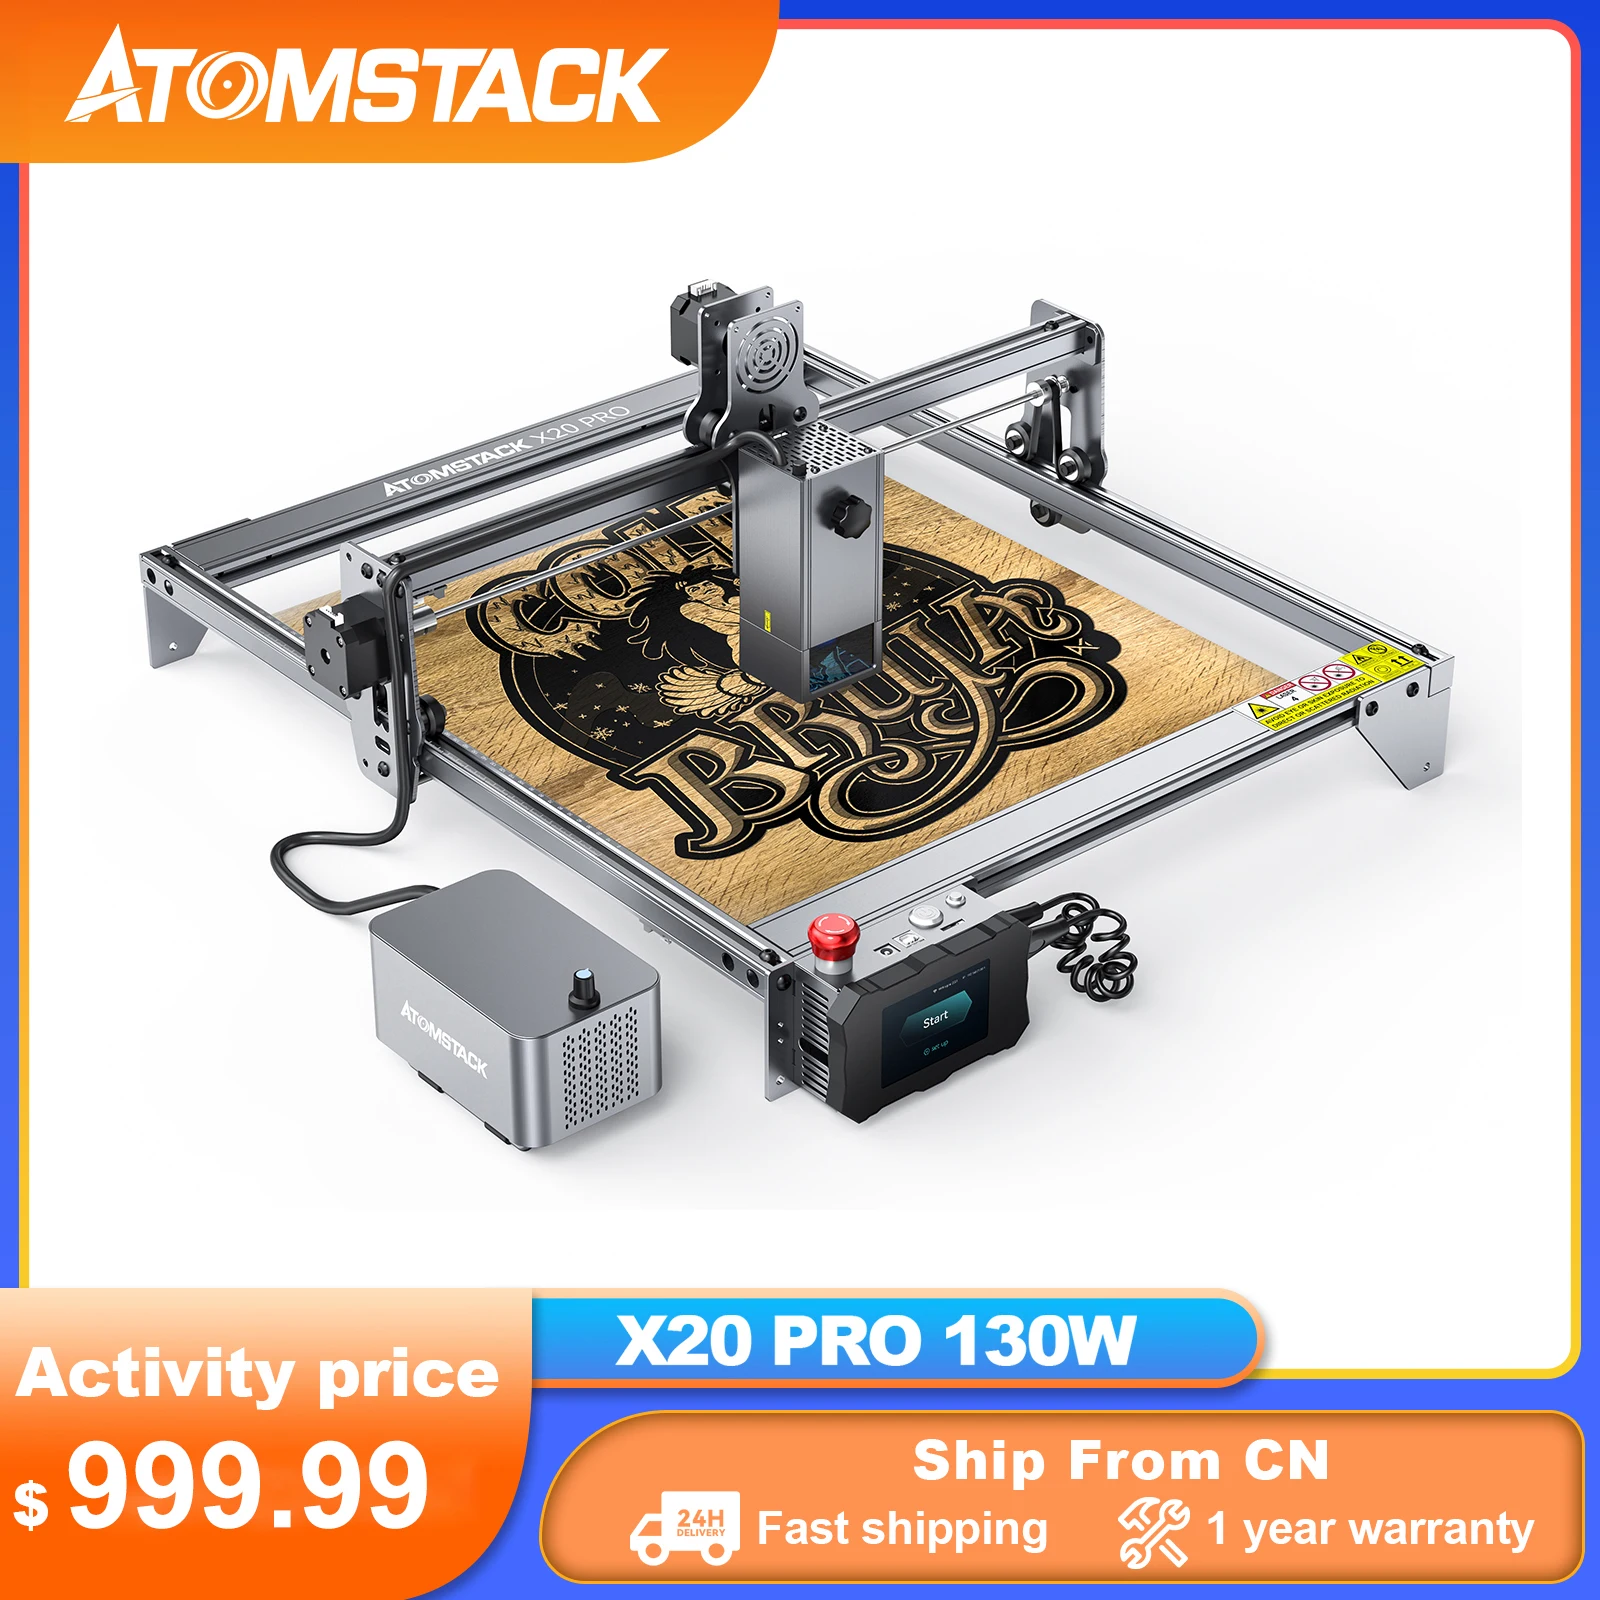 

ATOMSTACK S20/A20/X20 PRO 130W Quad-Laser Engraver Laser Cutting Machine Built-in Air Assist App Control Offline Engraving